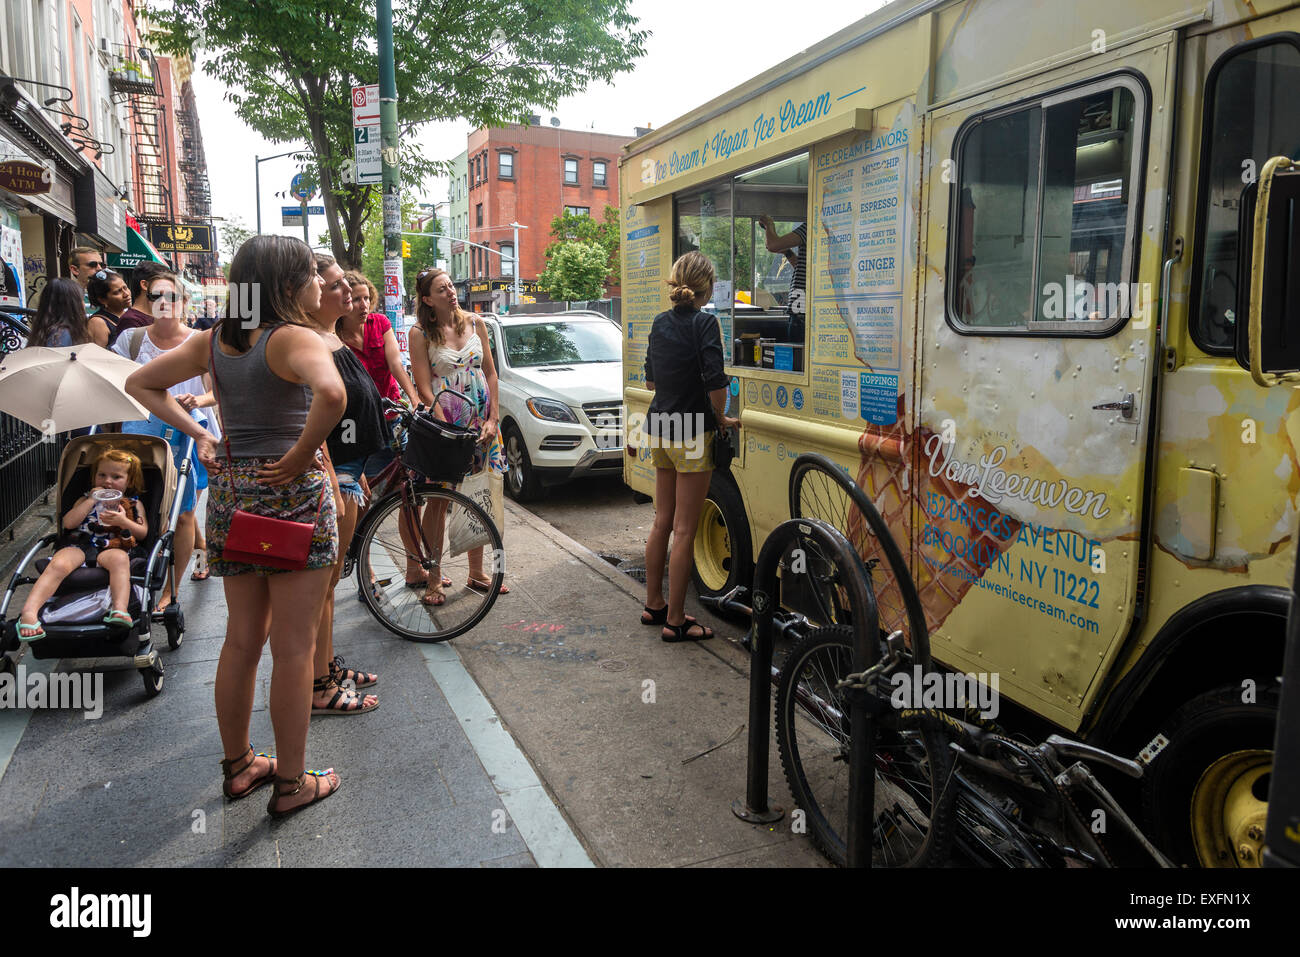 Brooklyn, New York - 12 July 2015 - People queue up for ice cream on Bedford Avenue in the Williamsburg neighborhood of New York City ©Stacy Walsh Rosenstock/Alamy Stock Photo